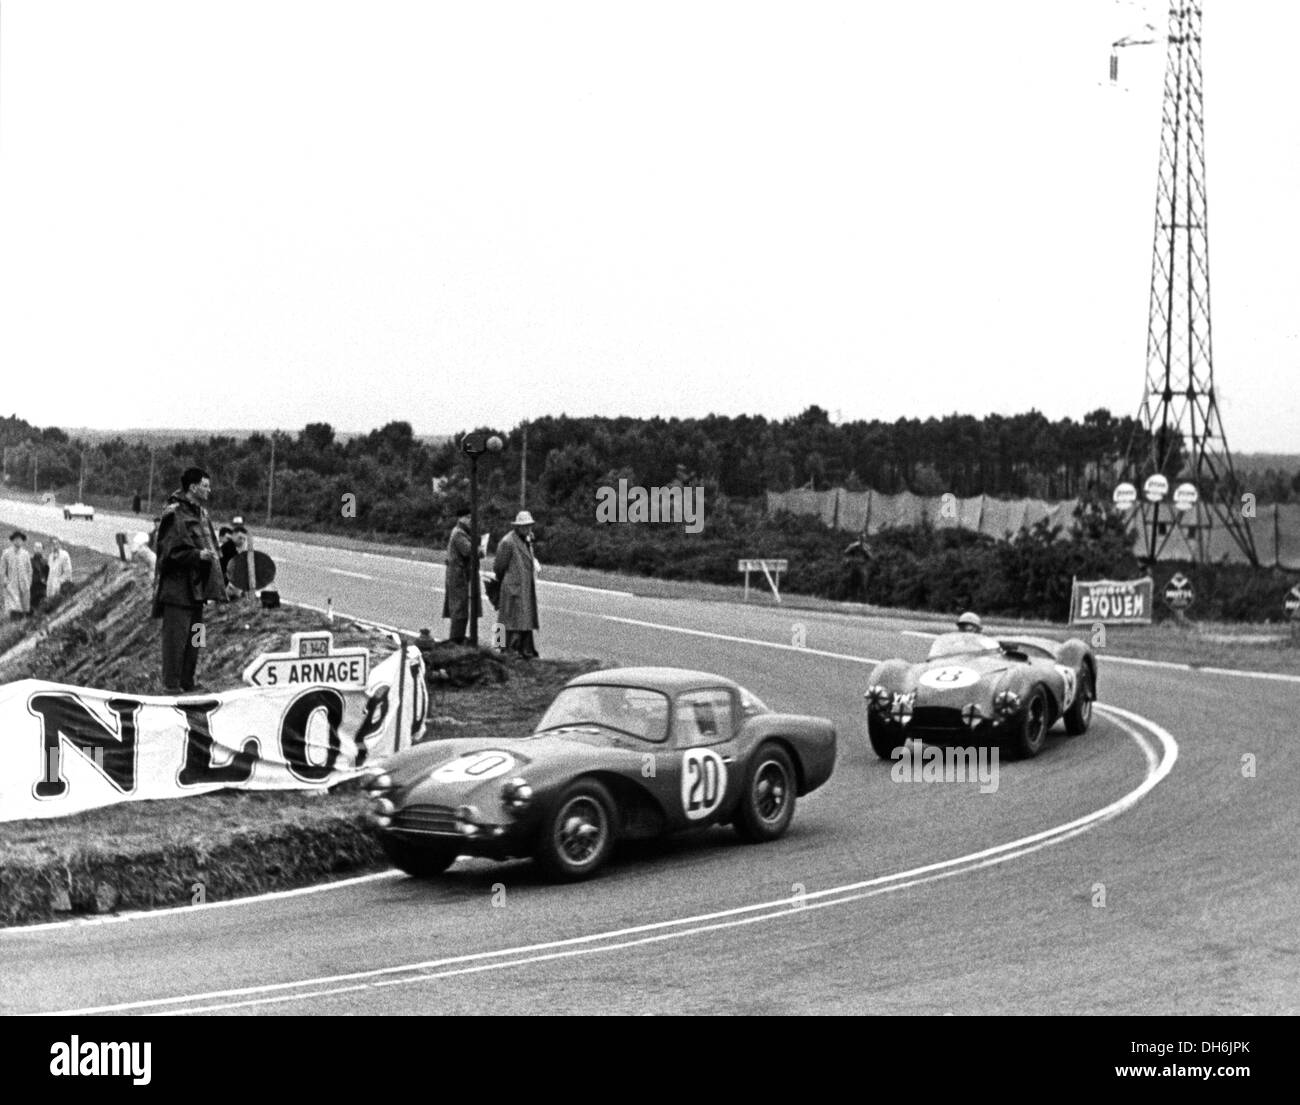 Peter Collins- Prince Bira Aston Martin DB3S Coupe leading the Reg Parnell DB3S at Le Mans, France 1954. Stock Photo